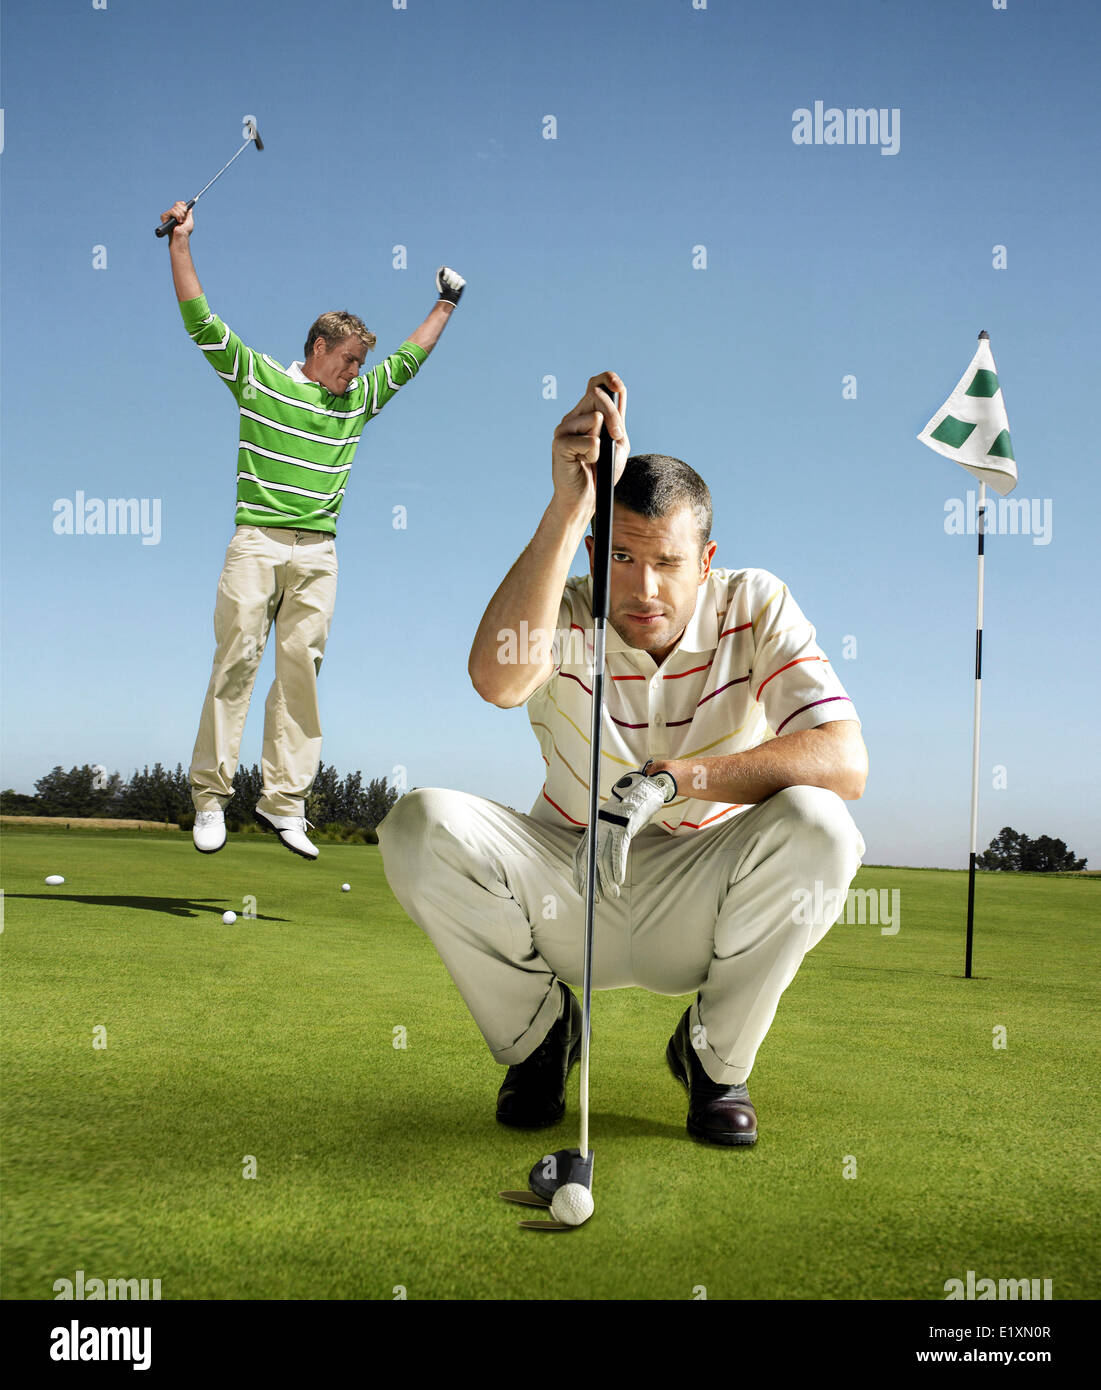 Full length portrait of golfer lining up shot with man jumping in background Stock Photo